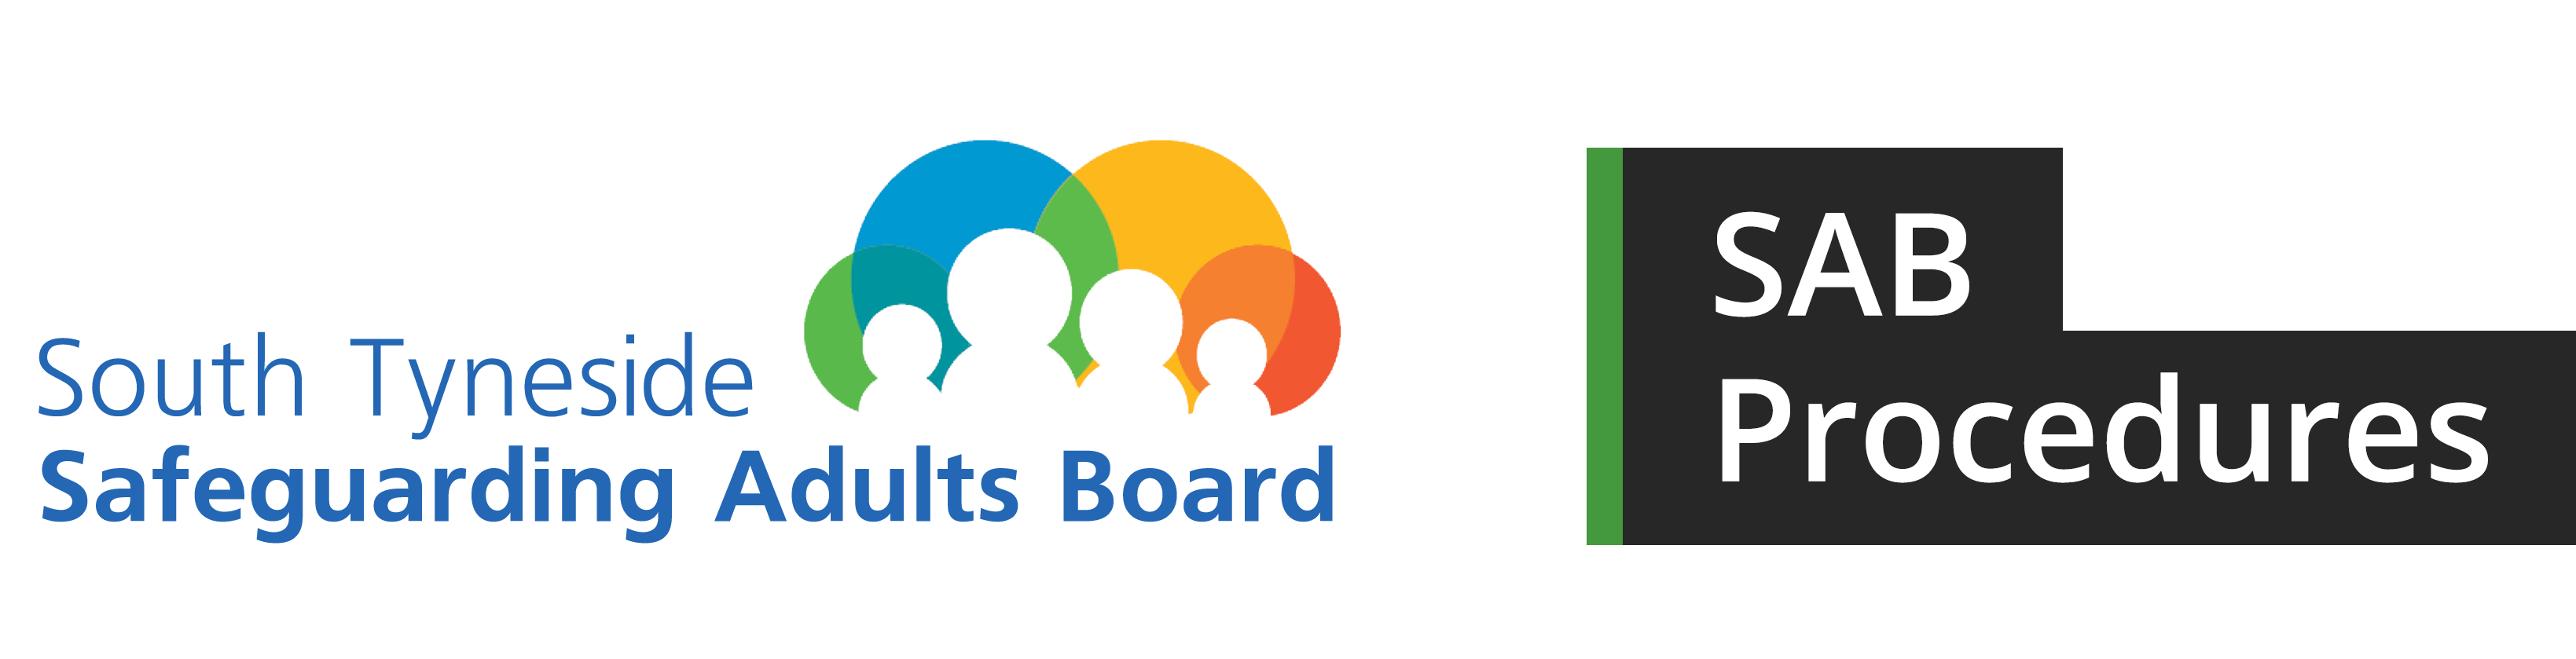 South Tyneside Safeguarding Adults Board APPP